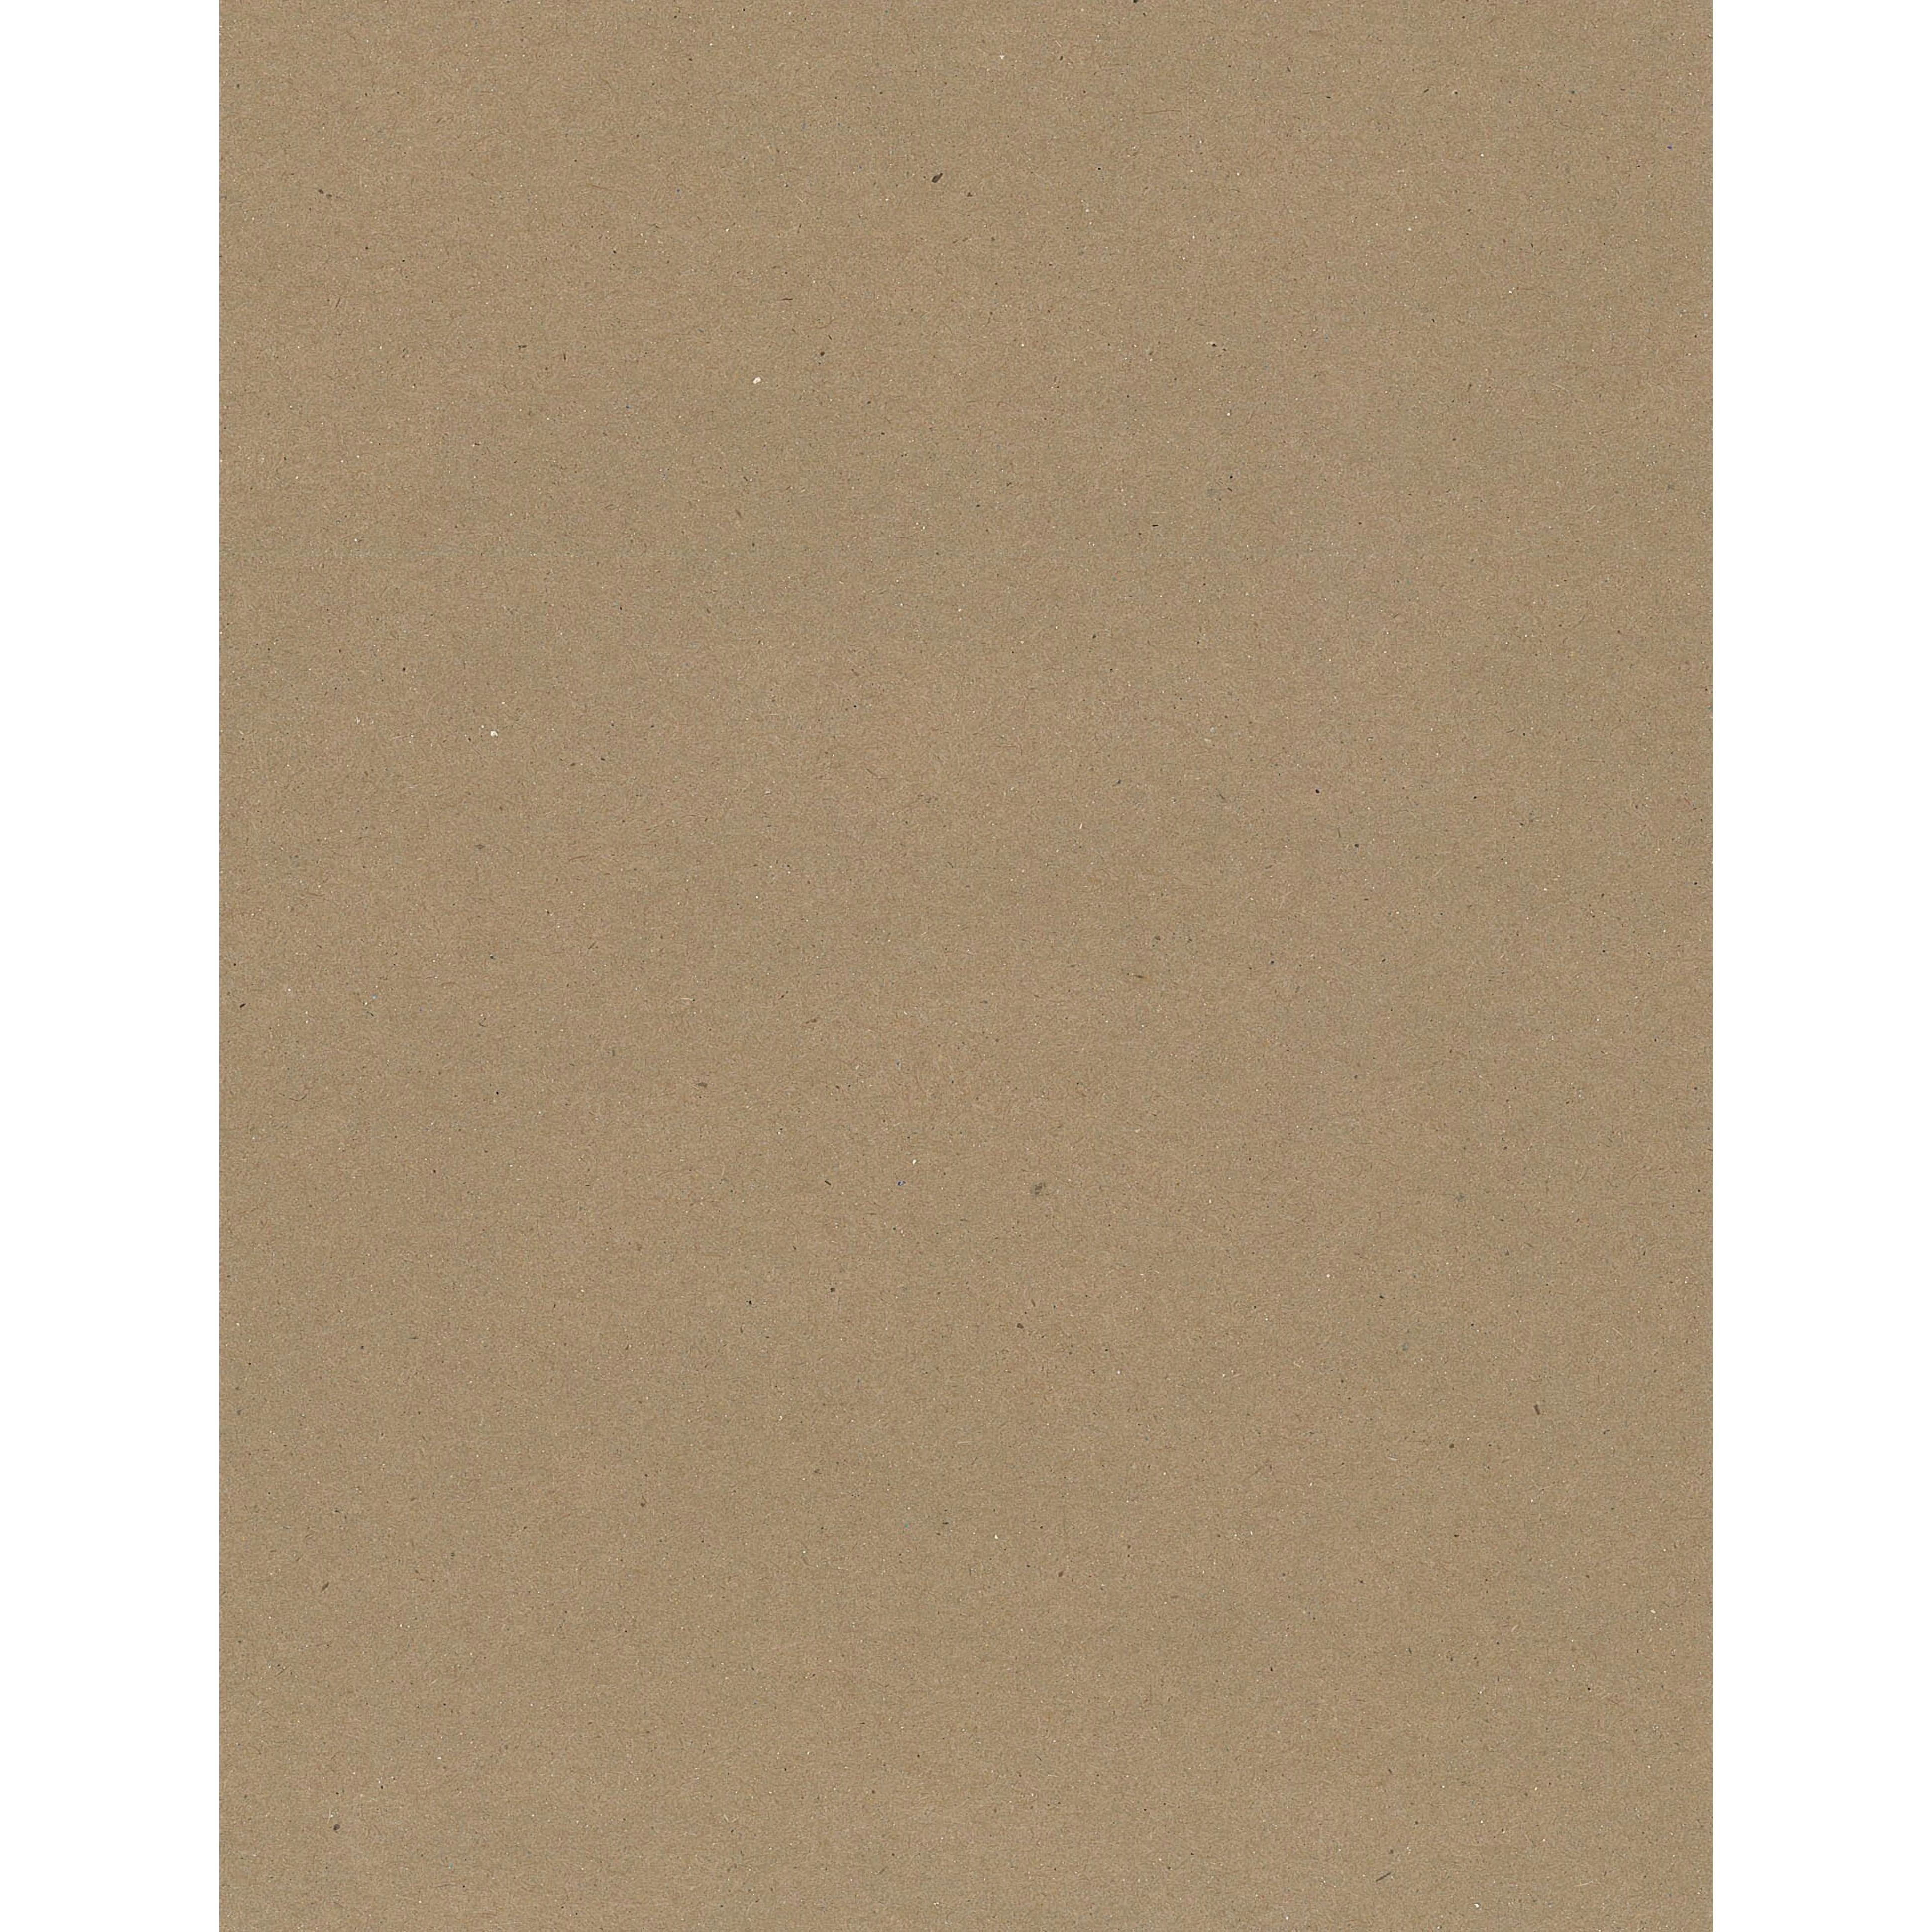 PA Paper™ Accents Black 8.5 x 11 Heavyweight Chipboard, 25 Sheets